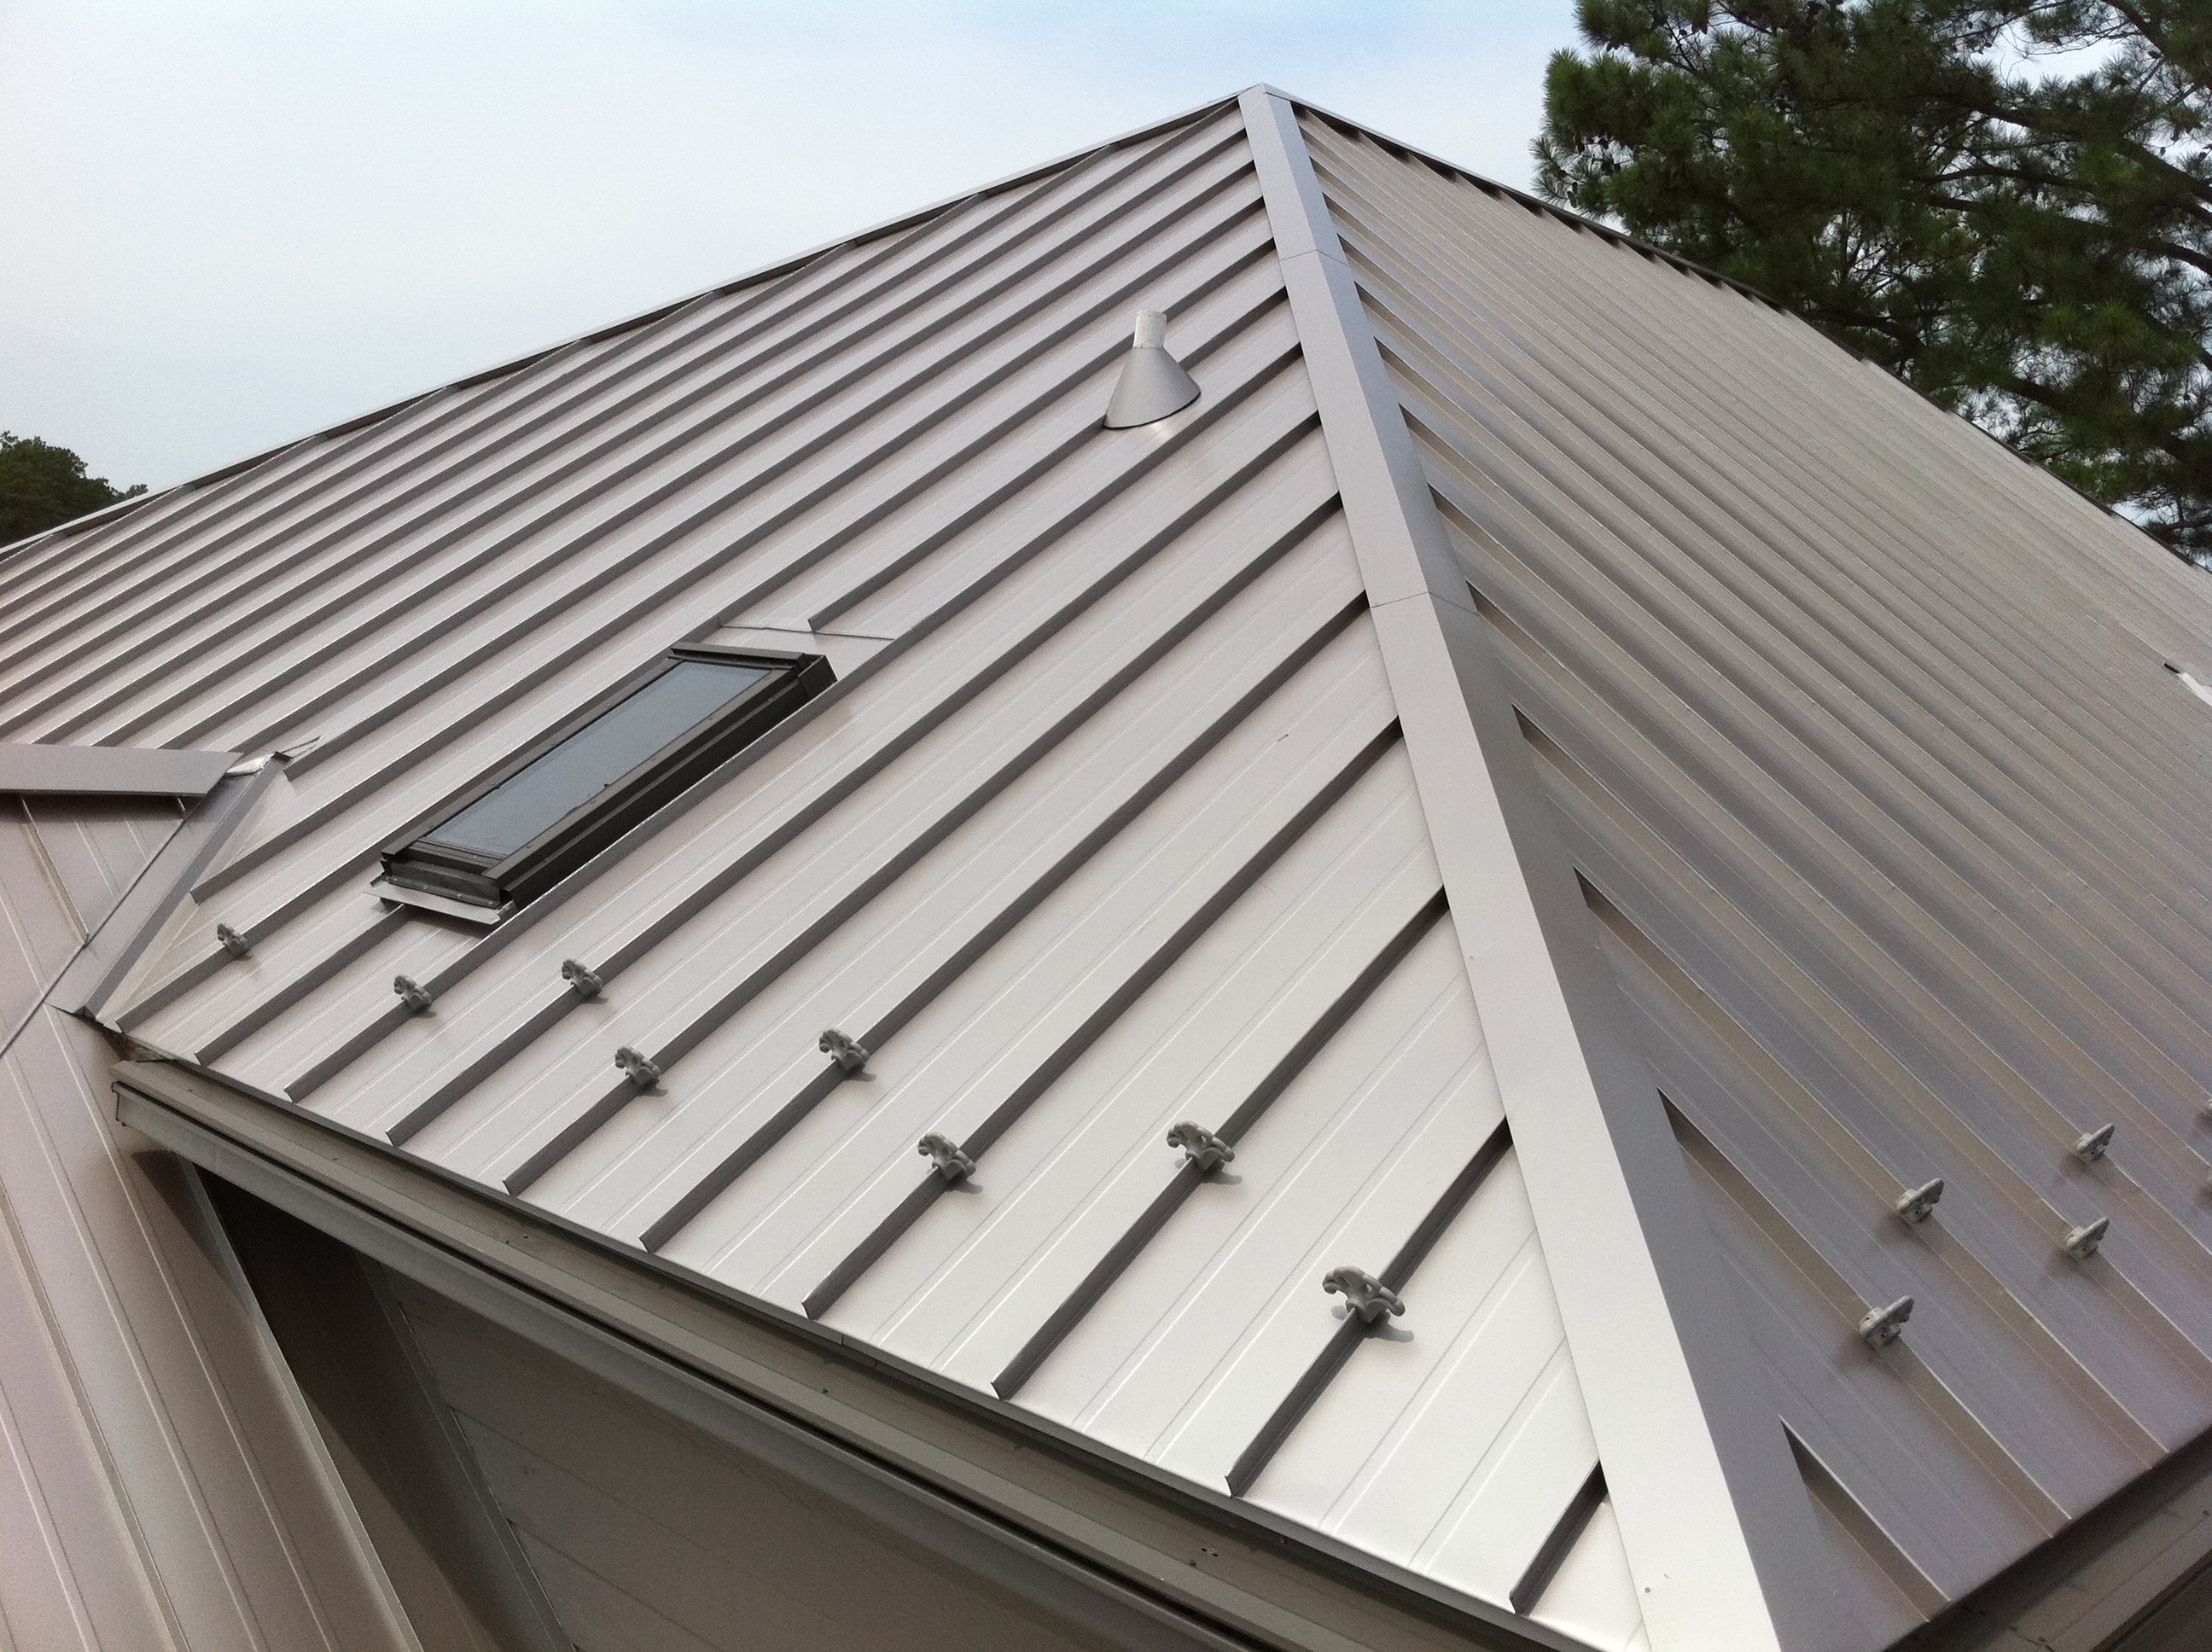 7 Reasons to Install a Standing Seam Metal Roof | News and Events for